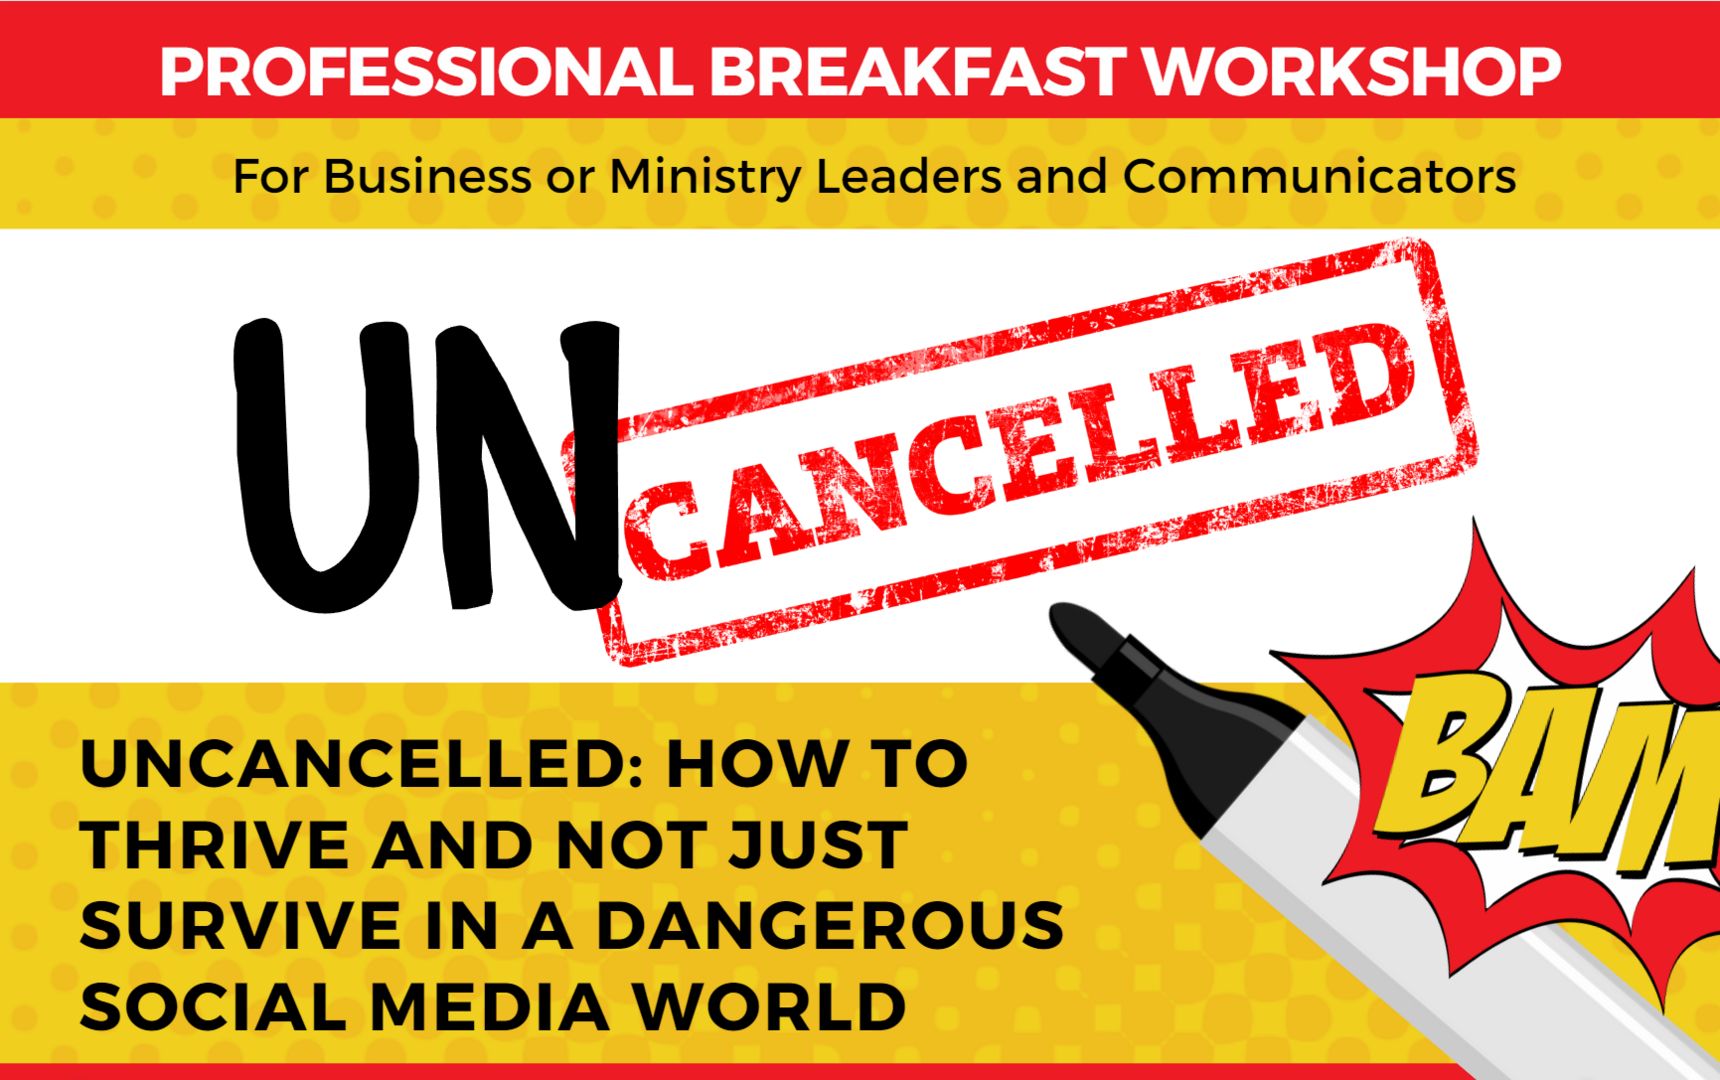 Uncancelled: How to Thrive and Not Just Survive in a Dangerous Social Media World (Breakfast), Lancaster, Pennsylvania, United States